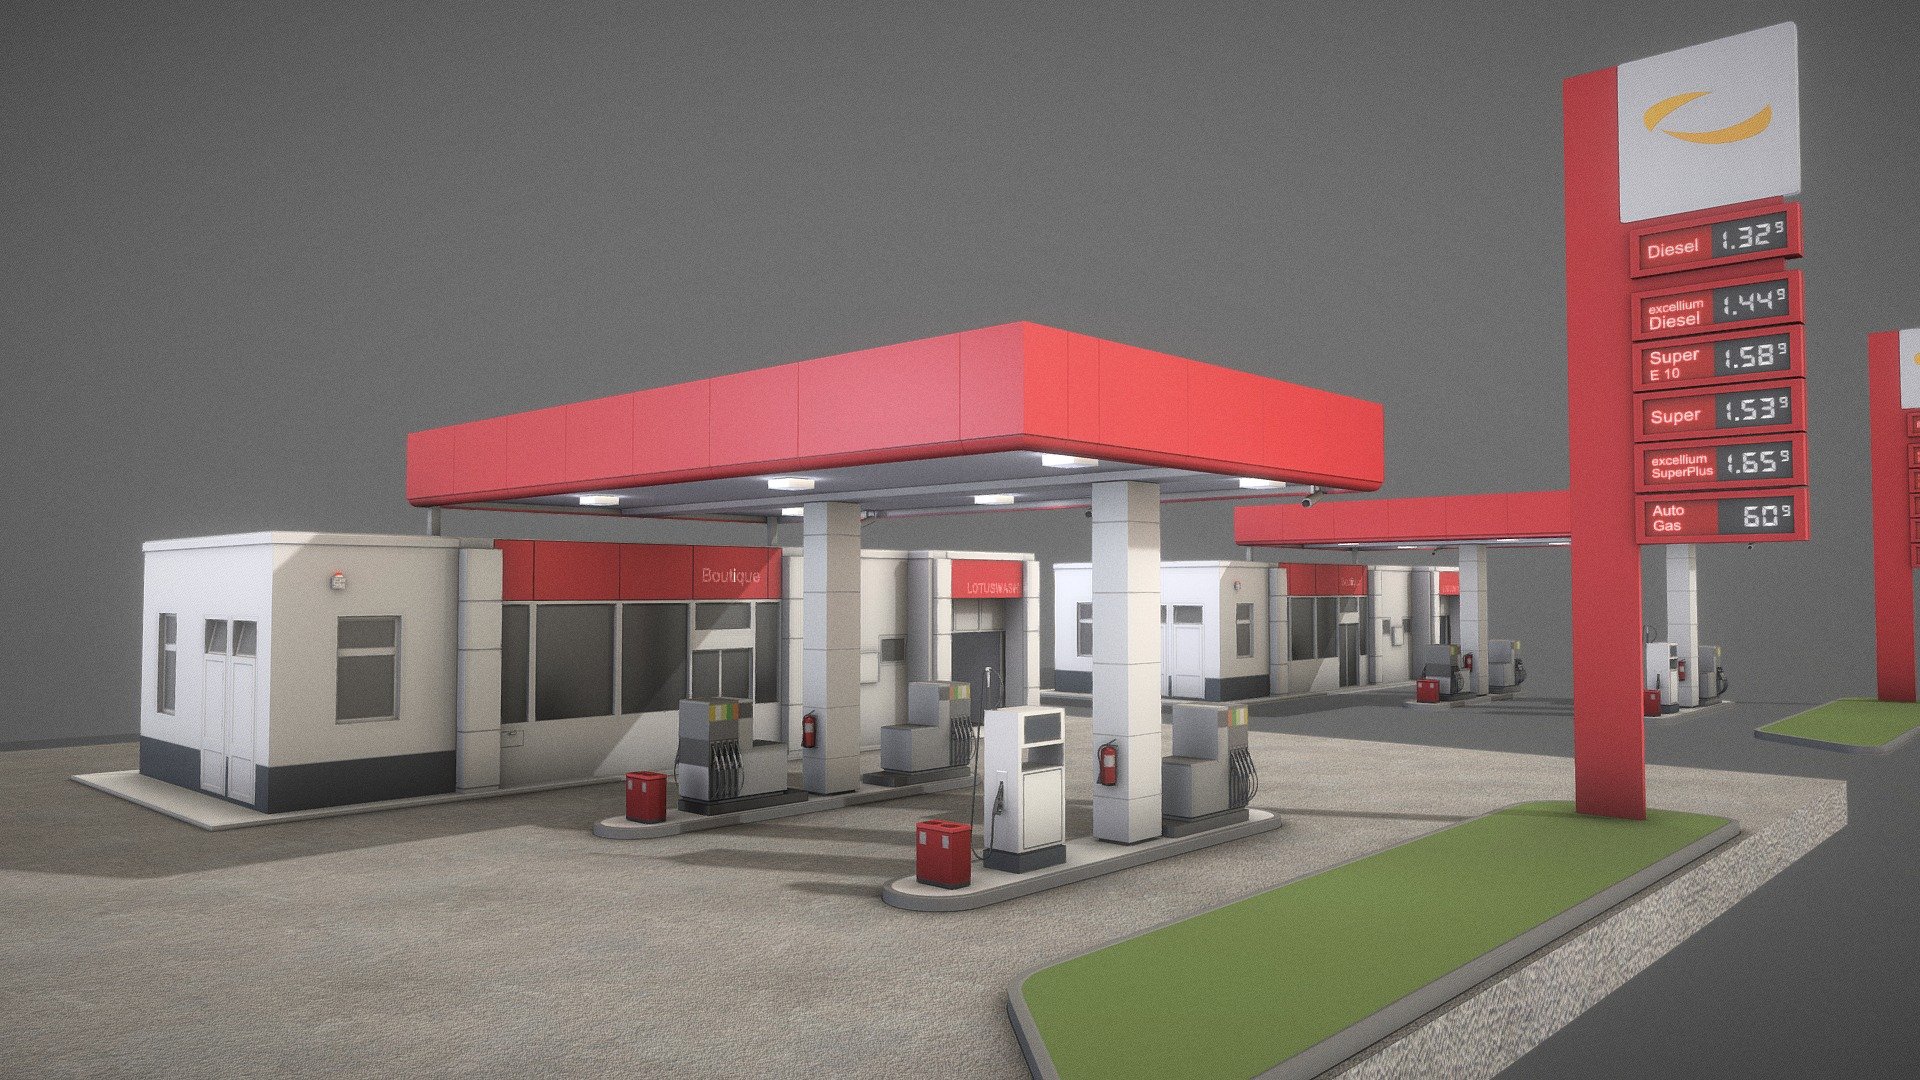 Here is the remastered version of gas station type-1.
The old version has 57 materials and the new version has only 2 materials :)
I baked everything on two texture-sets, one for the gas station and one for the ground.
Also I removed some unimportant objects.





Demo-Video (Blender-2.91)




Old Version (4 years ago)



Downloadable Parts:




Gas_Station_Type_1 

16.460m x 17.838m x 5.524m

Polygons = 13781






Gas_Station_Type_1_All 

23.499m x 27.224m x 10.704m

Polygons = 20779






Gas_Station_Type_1_Price_Display_Board 

13.621m x 3.585m x 10.046m

Polygons = 6967






Object rotation and location is 0, scale is 1.000 x 1.000 x 1.000

Texture map types (8K): Base Color, Normal, Metalness, Roughness



Last update:




03.05.22






3d modeled, textured and animated by 3DHaupt in Blender-3D.
 - Gas Station Type-1 (Remastered) - Buy Royalty Free 3D model by VIS-All-3D (@VIS-All) 3d model